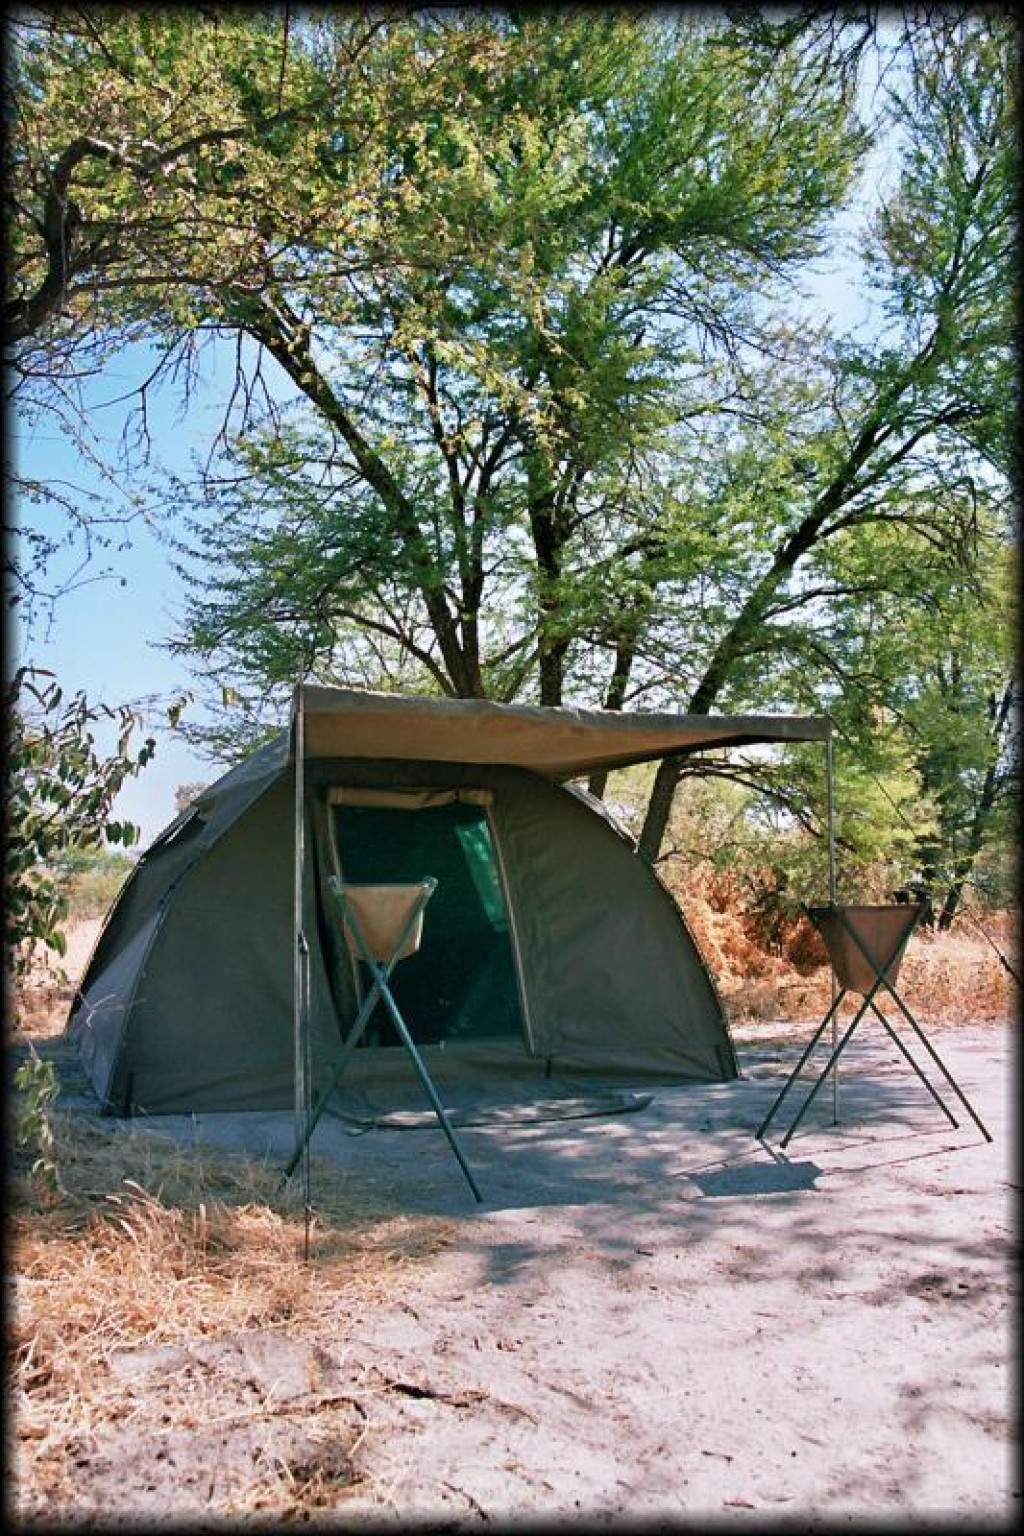 This is our tent.  The two things out front are our sinks, which they filled every morning with hot water.